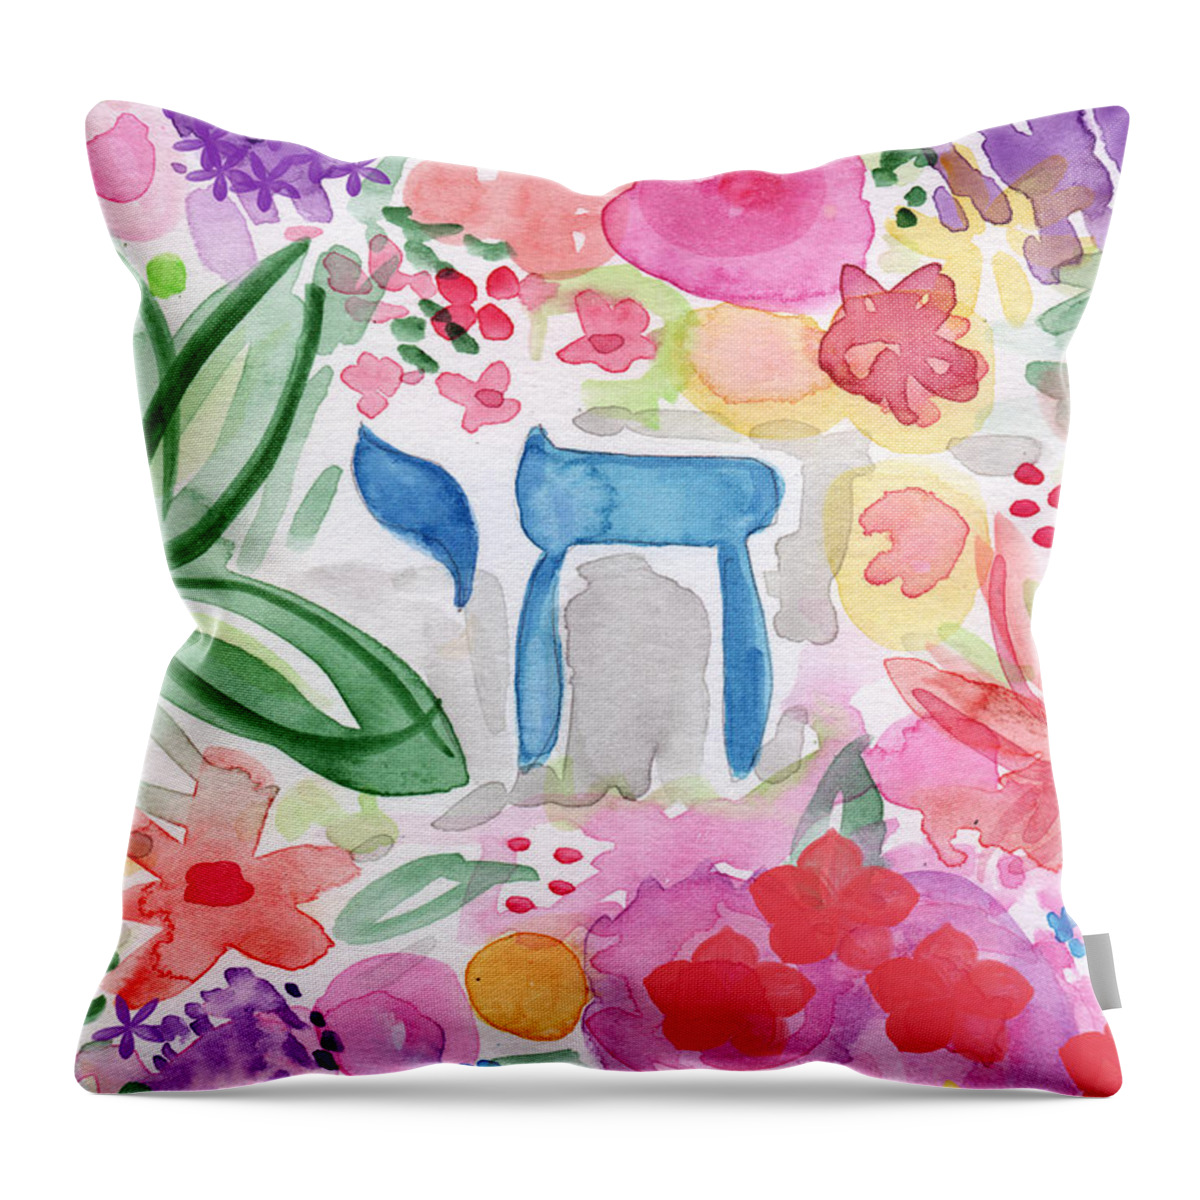 Garden Throw Pillow featuring the painting Garden of Life by Linda Woods